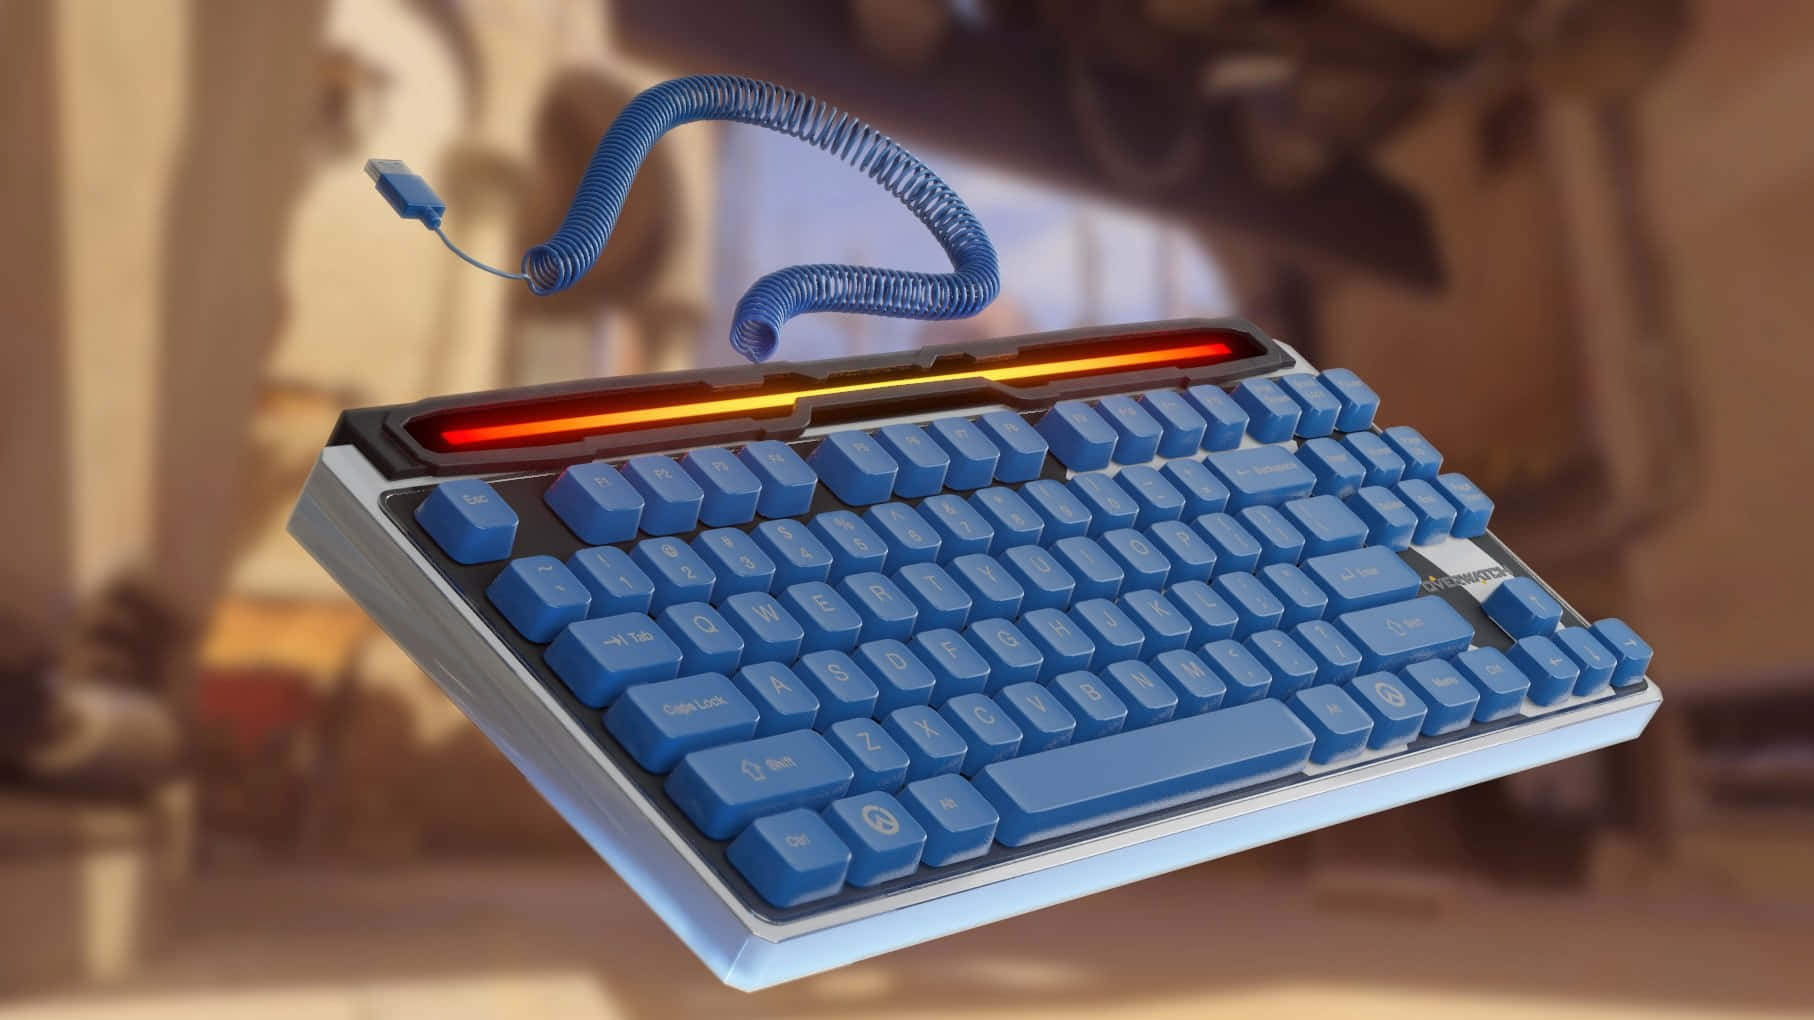 Look no further for the most stylish and reliable keyboard